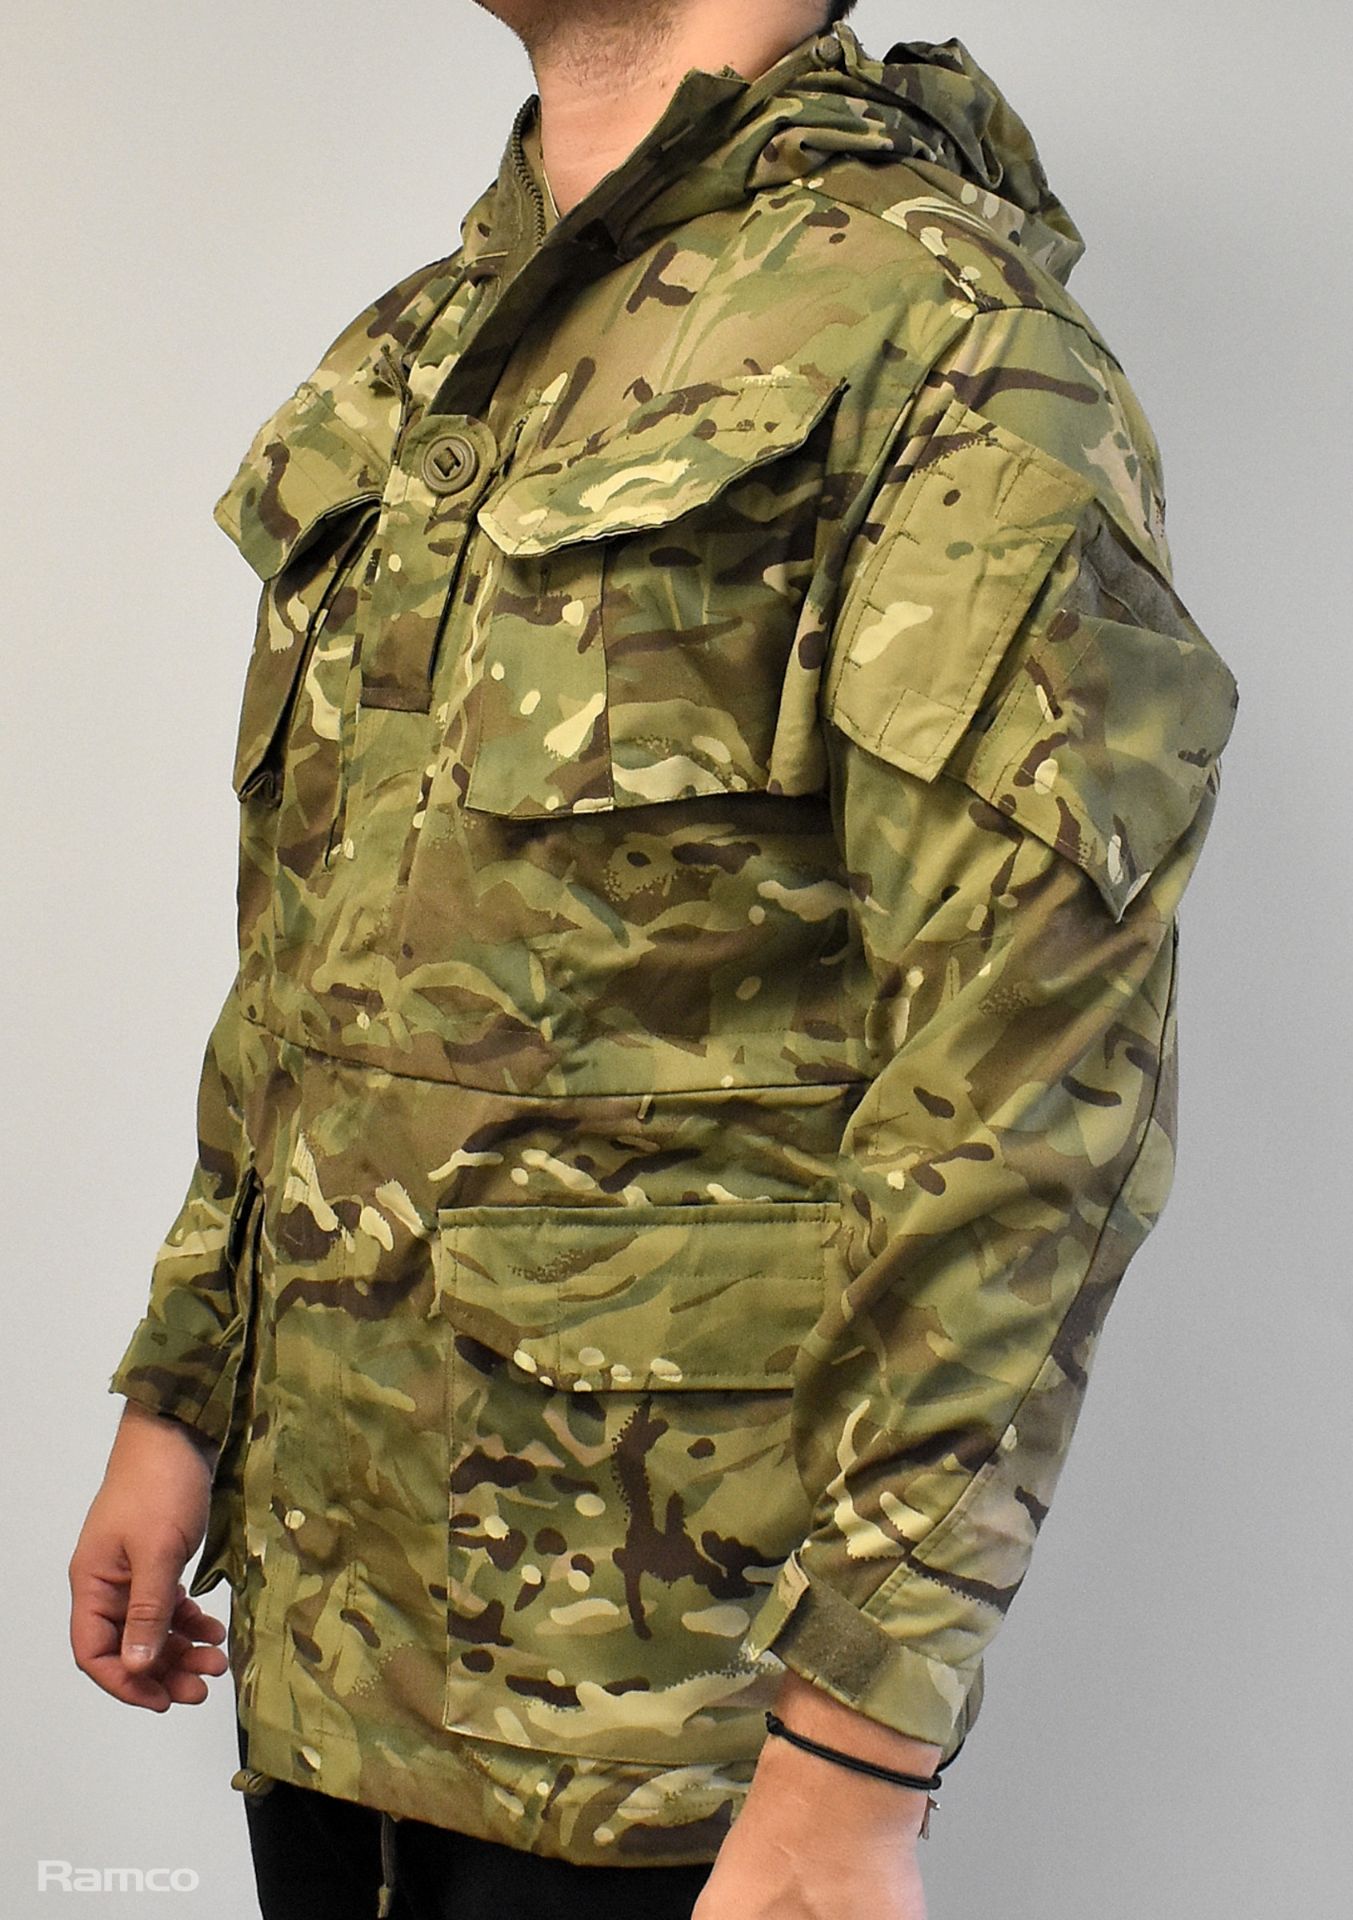 60x British Army MTP combat smocks 2 windproof - mixed grades and sizes - Image 2 of 12